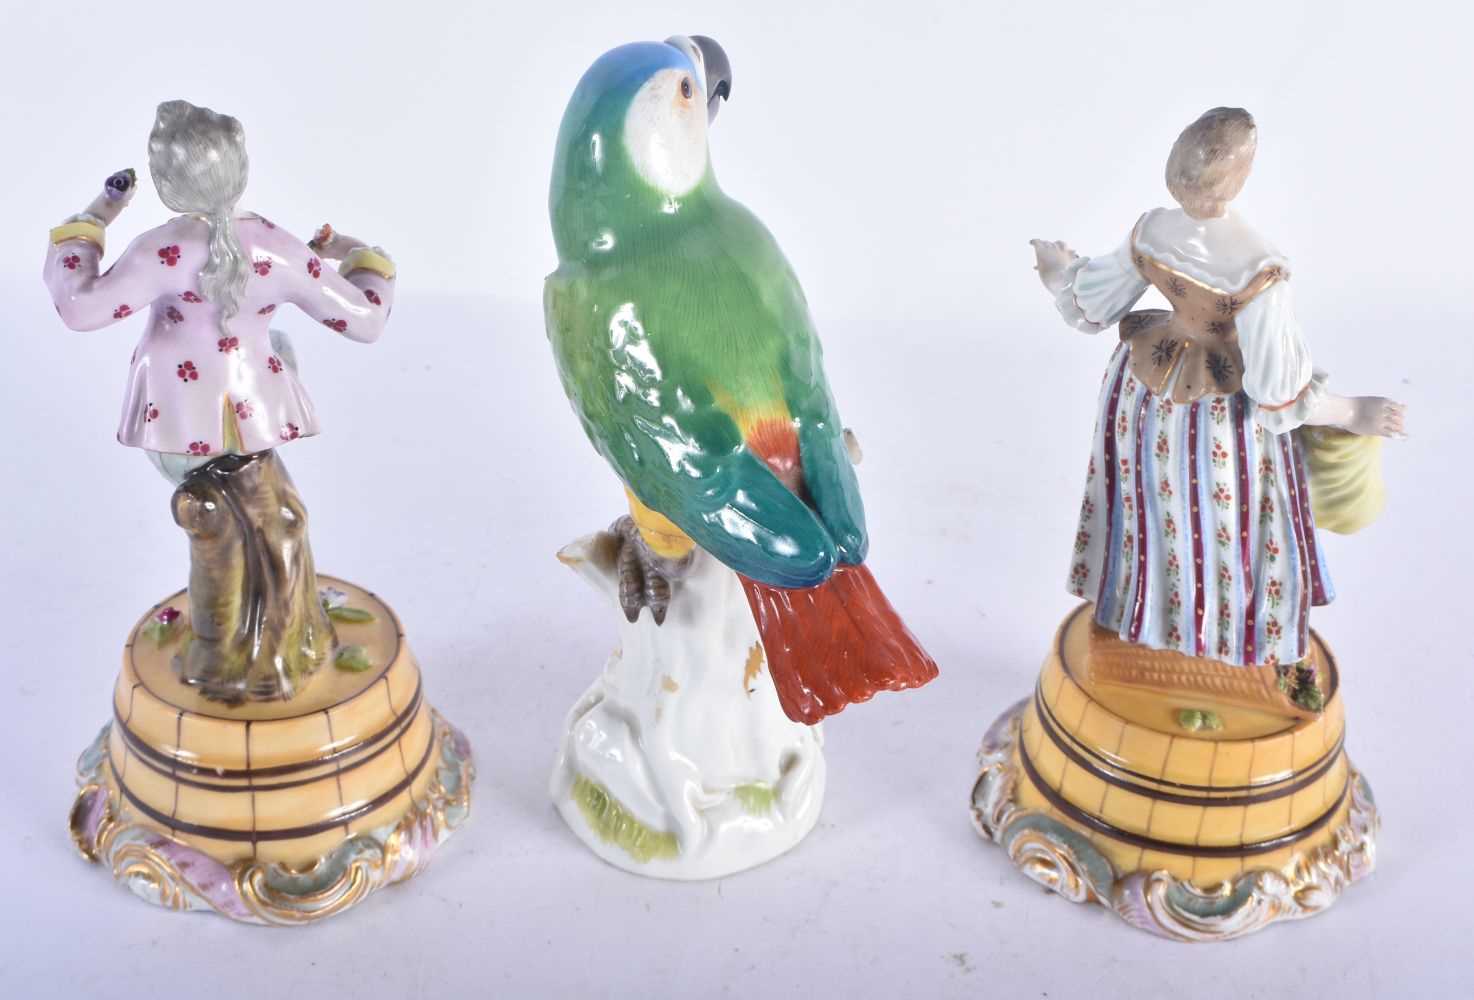 A MEISSEN PORCELAIN FIGURE OF A PARROT together with a pair of Continental figures. Largest 15 cm - Image 2 of 4